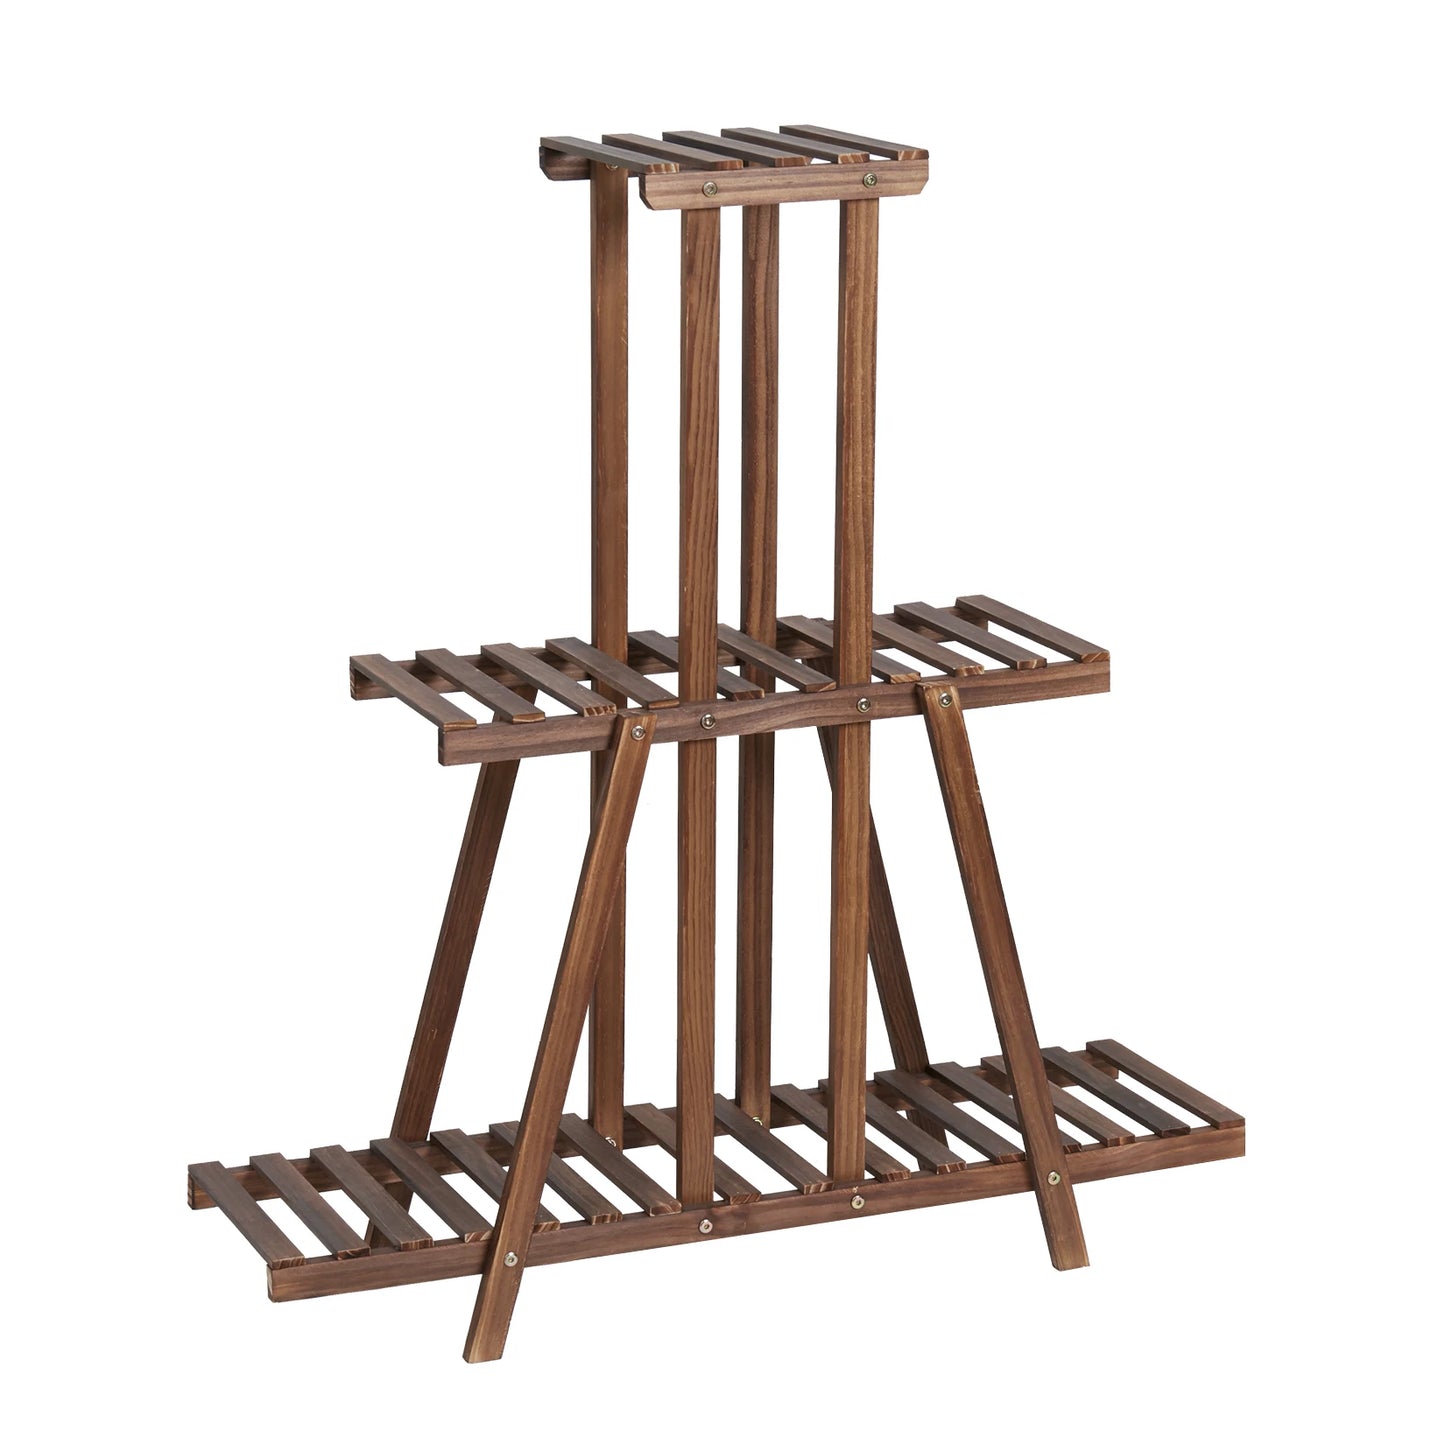 Penelope's Picks Wooden Plant Stand - Wood Plant Stands - KonnaLiving